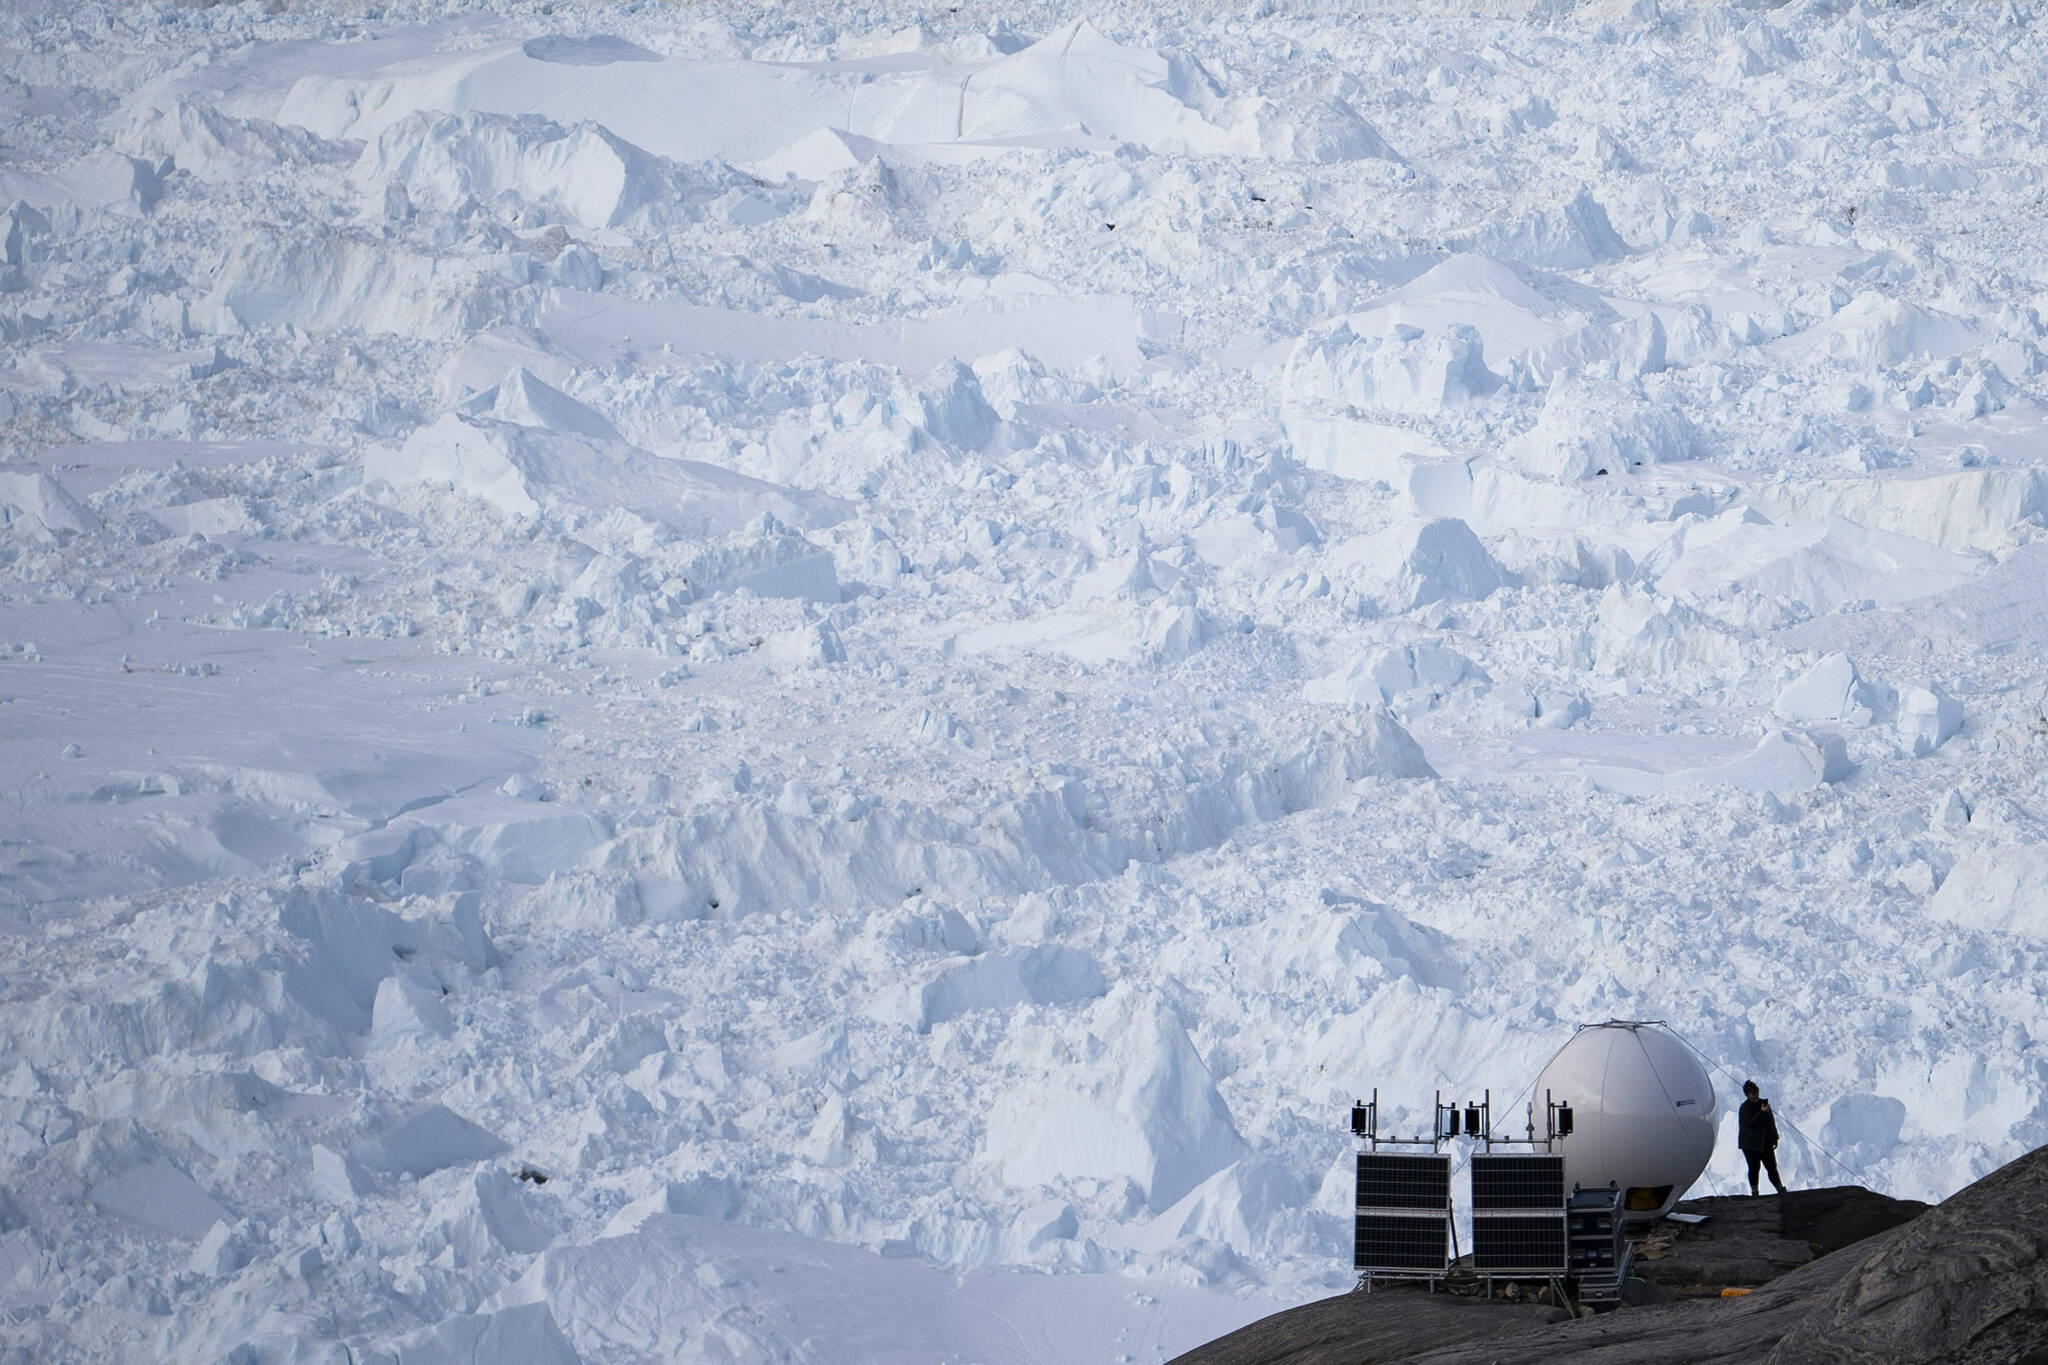 FILE - A woman stands next to an antenna at an NYU base camp at the Helheim glacier in Greenland on Friday, Aug. 16, 2019. In an effort to combat climate change and help develop Arctic communities, the Department of Energy Wednesday announced it was seeking to develop new sustainable energy projects in Alaska. (AP Photo / Felipe Dana)